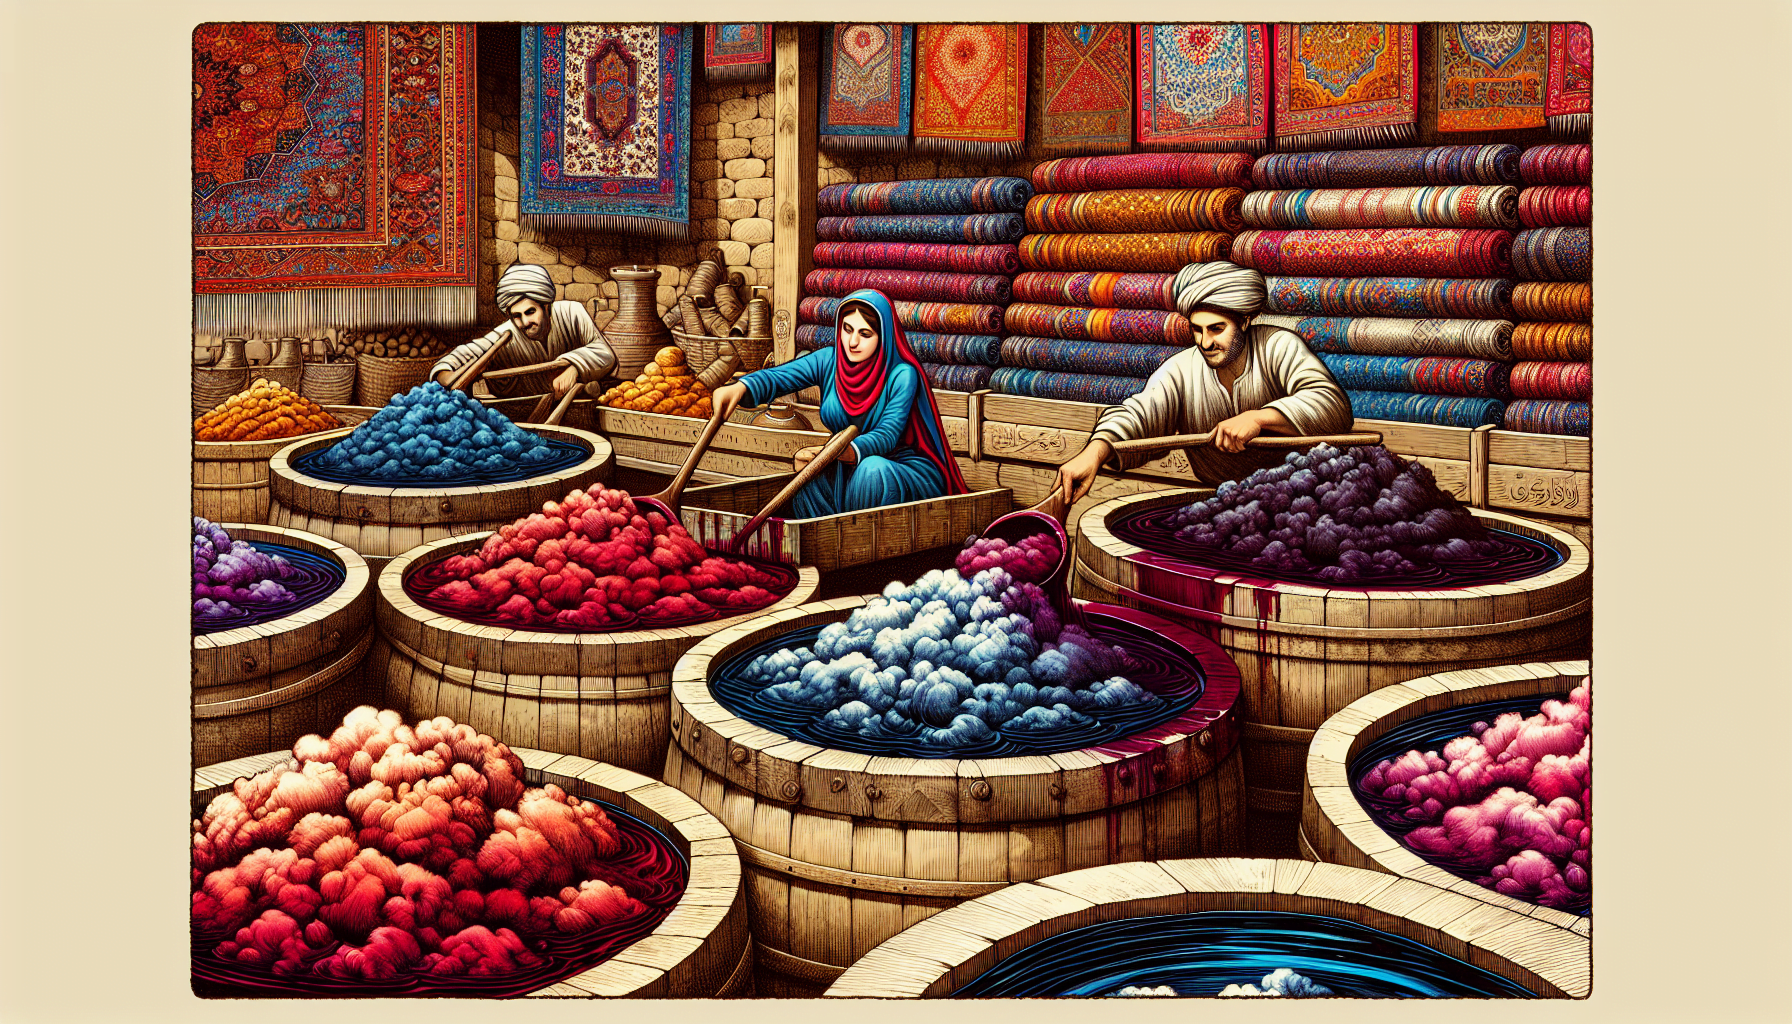 Illustration of the process of dyeing wool using natural vegetable dyes for Persian rugs